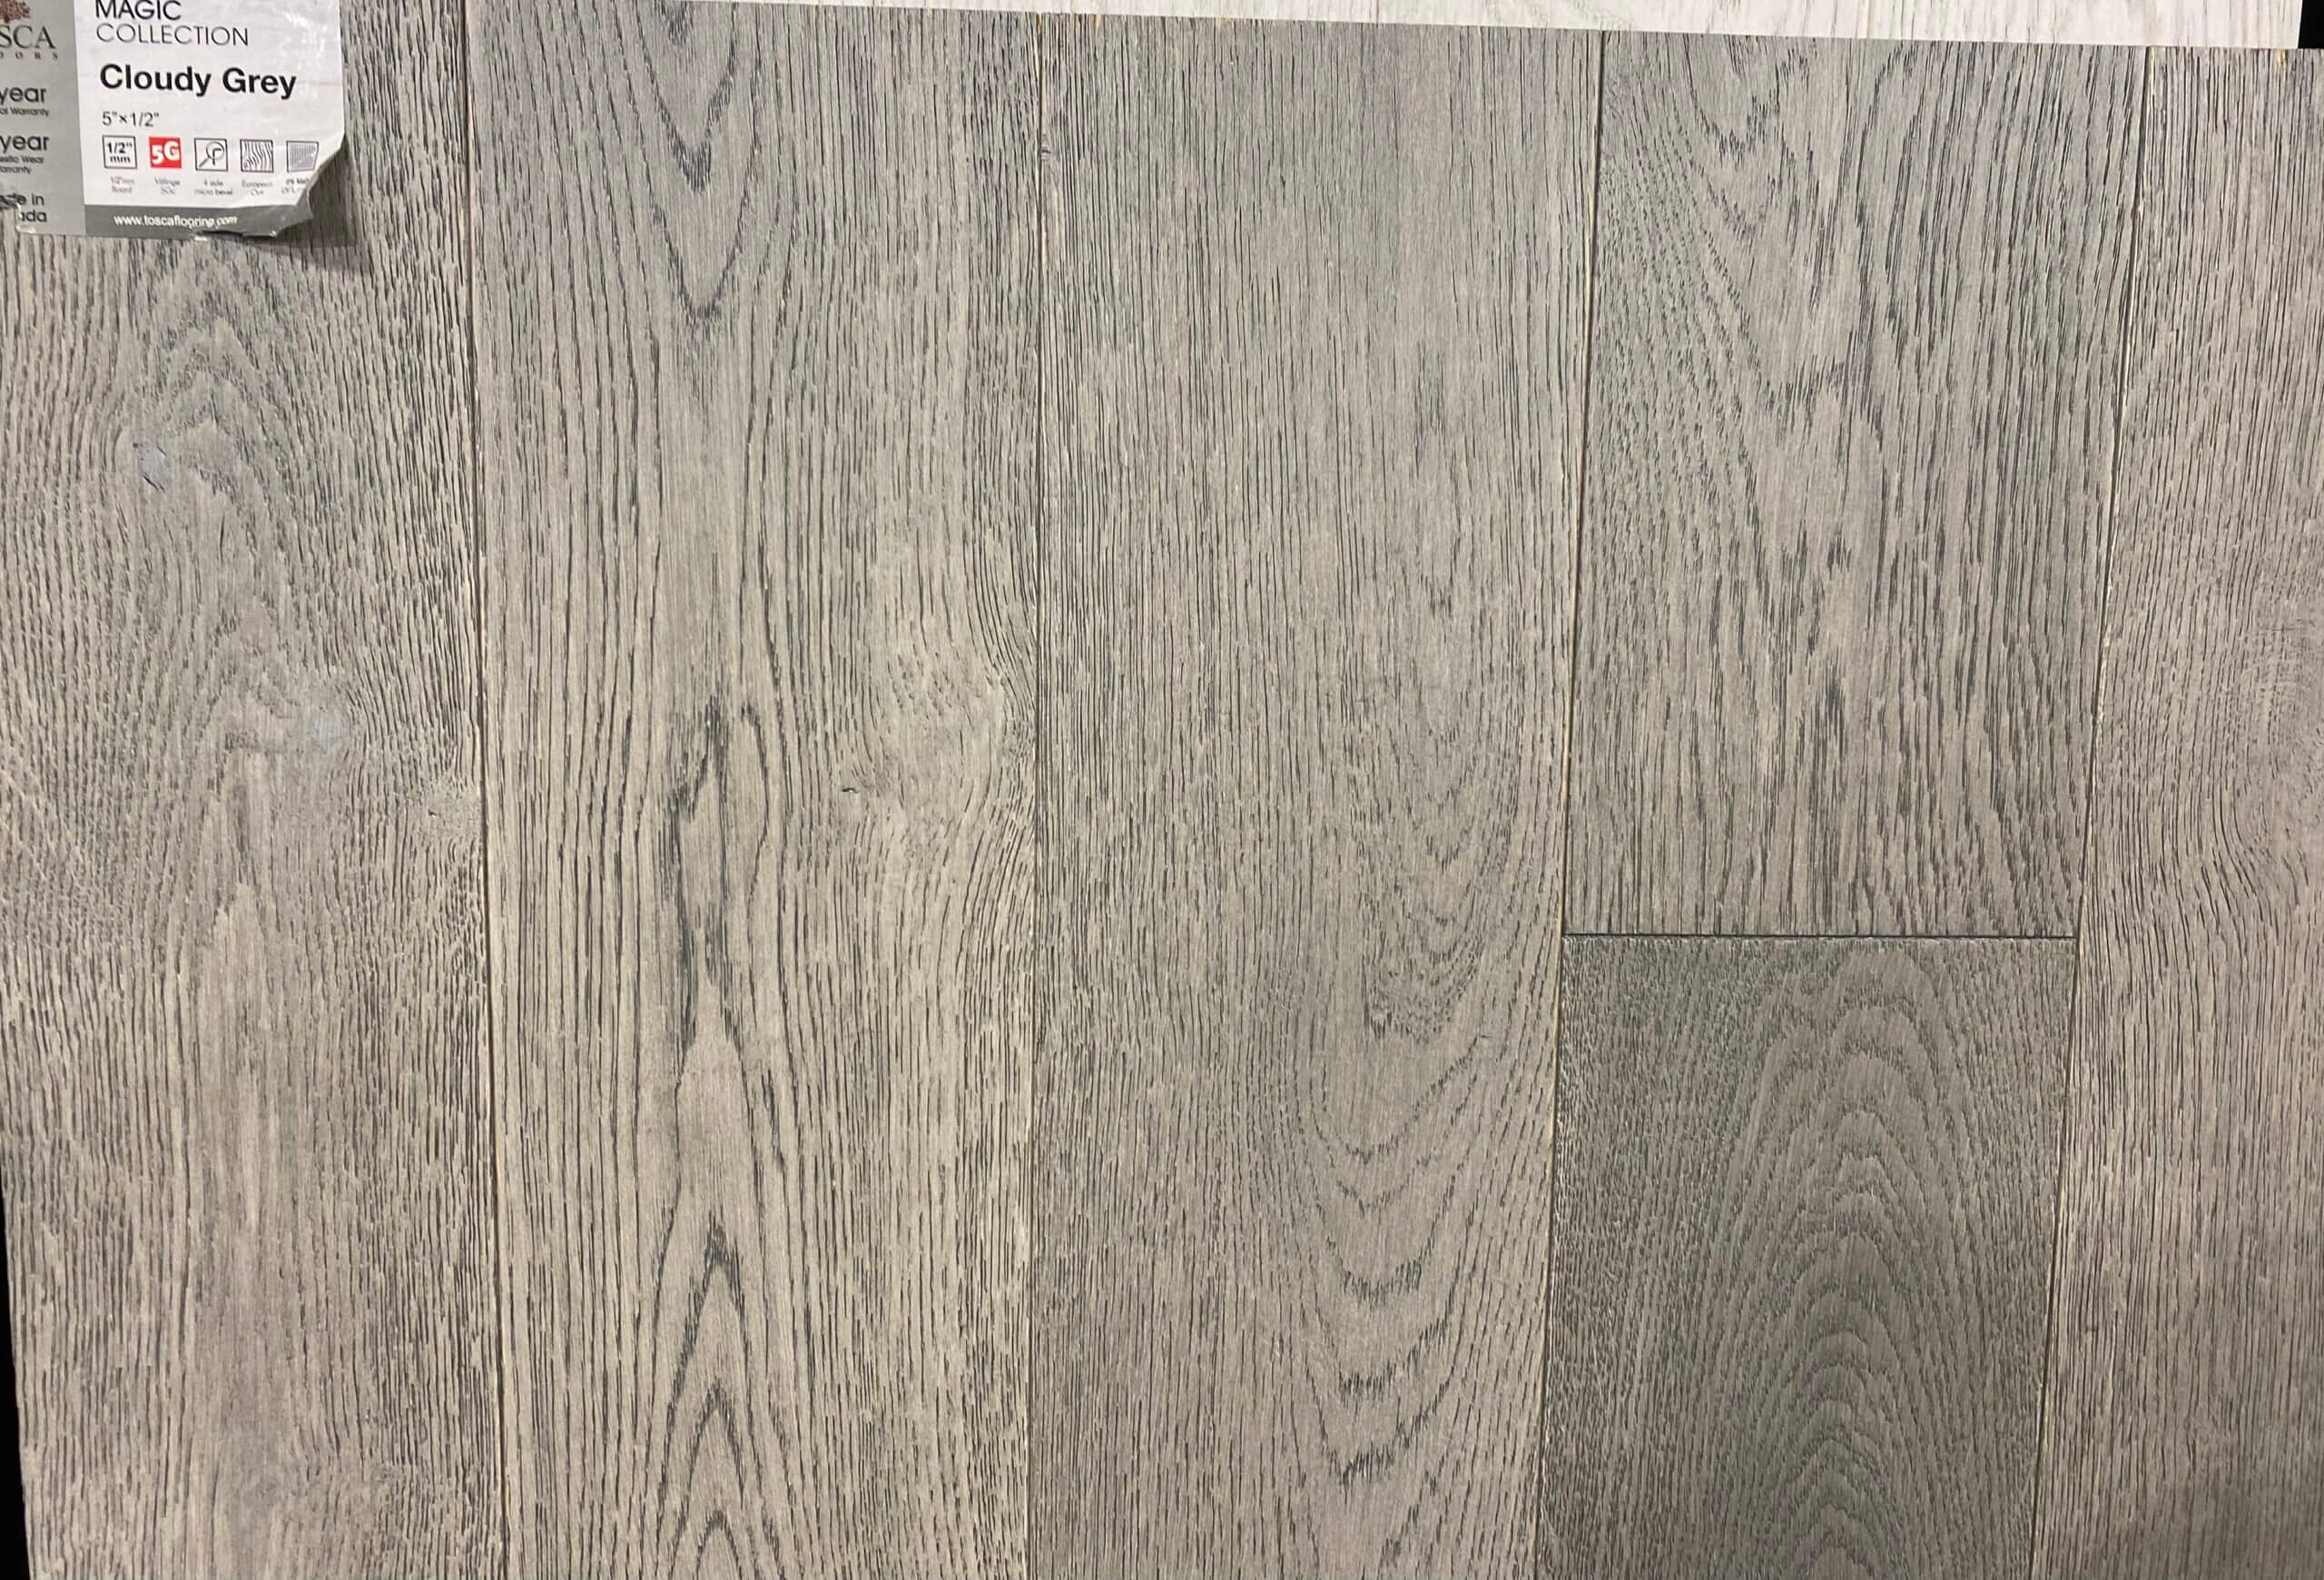 Tosca Engineered Flooring Magic Collection  Cloudy Grey 5″x1/2″ mm